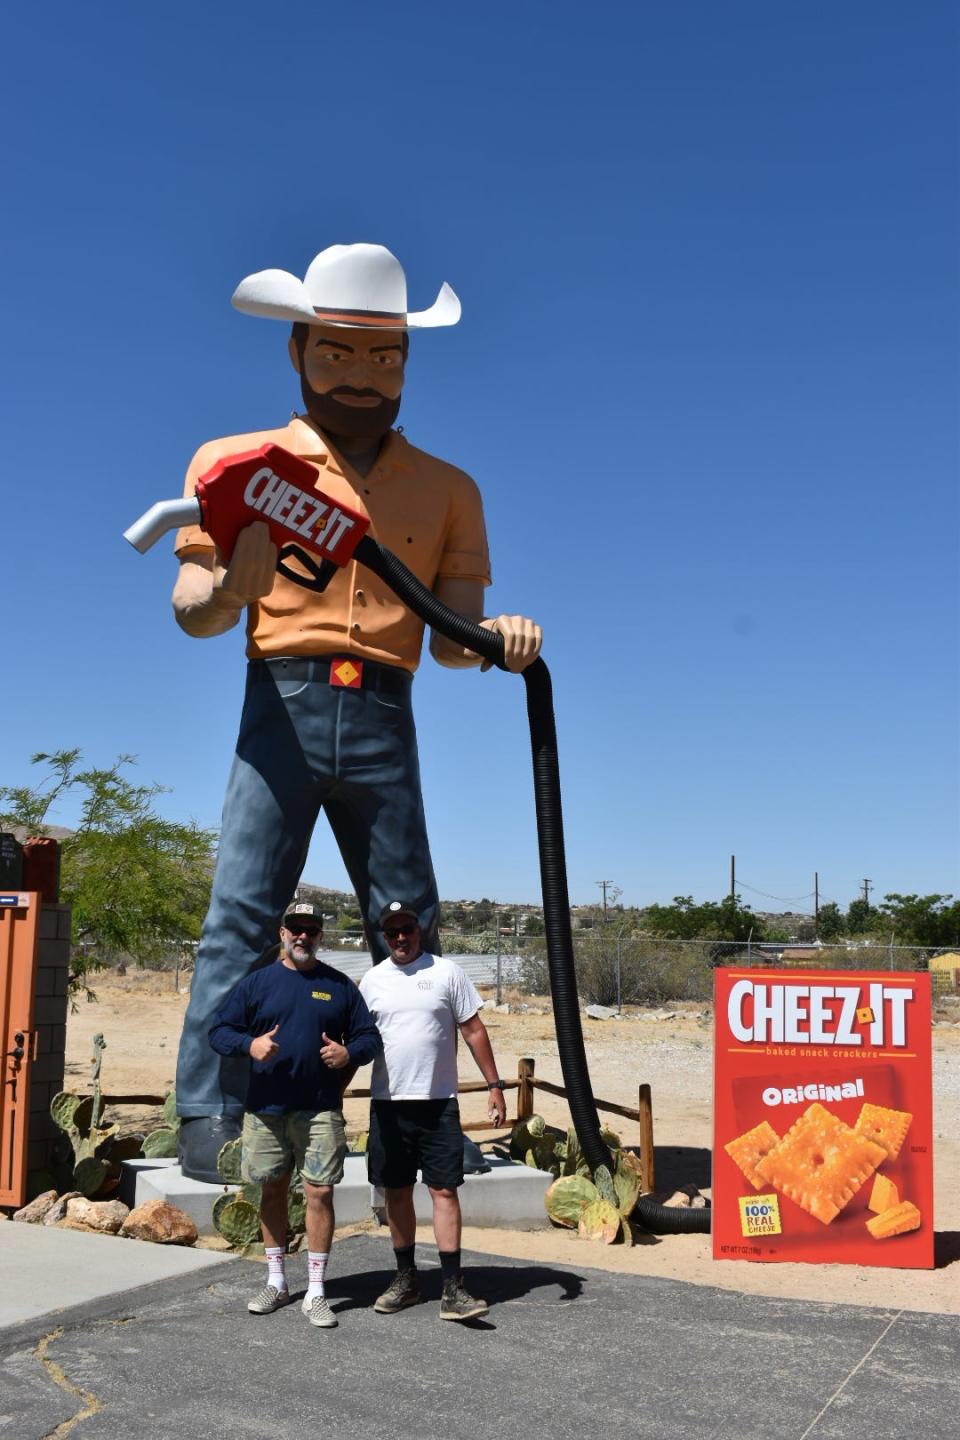 Owners of The Station, Glen Steigelman and Steve Halterman in front of Big josh-gone-Cheez-it.